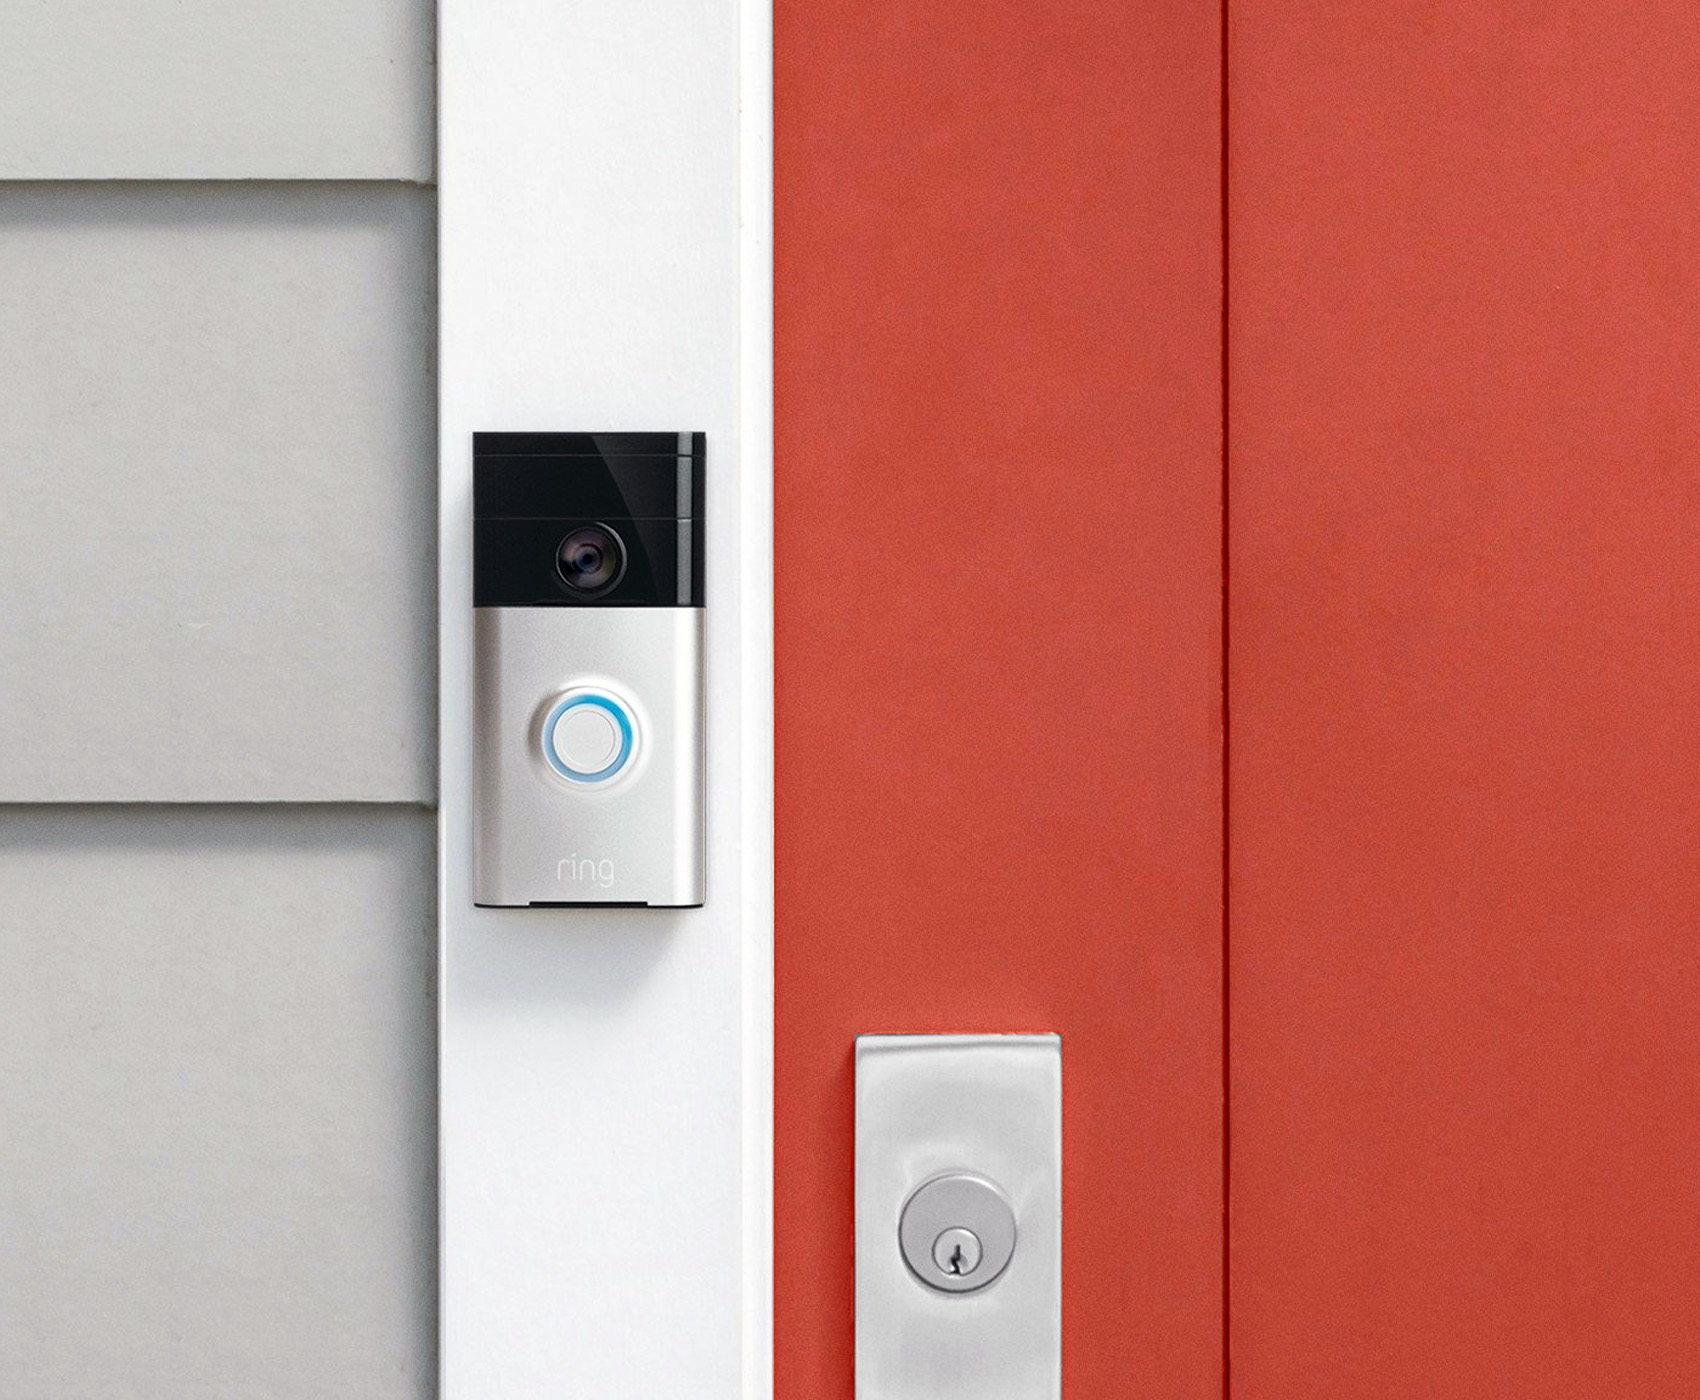 How to remove a Ring Doorbell 1.0